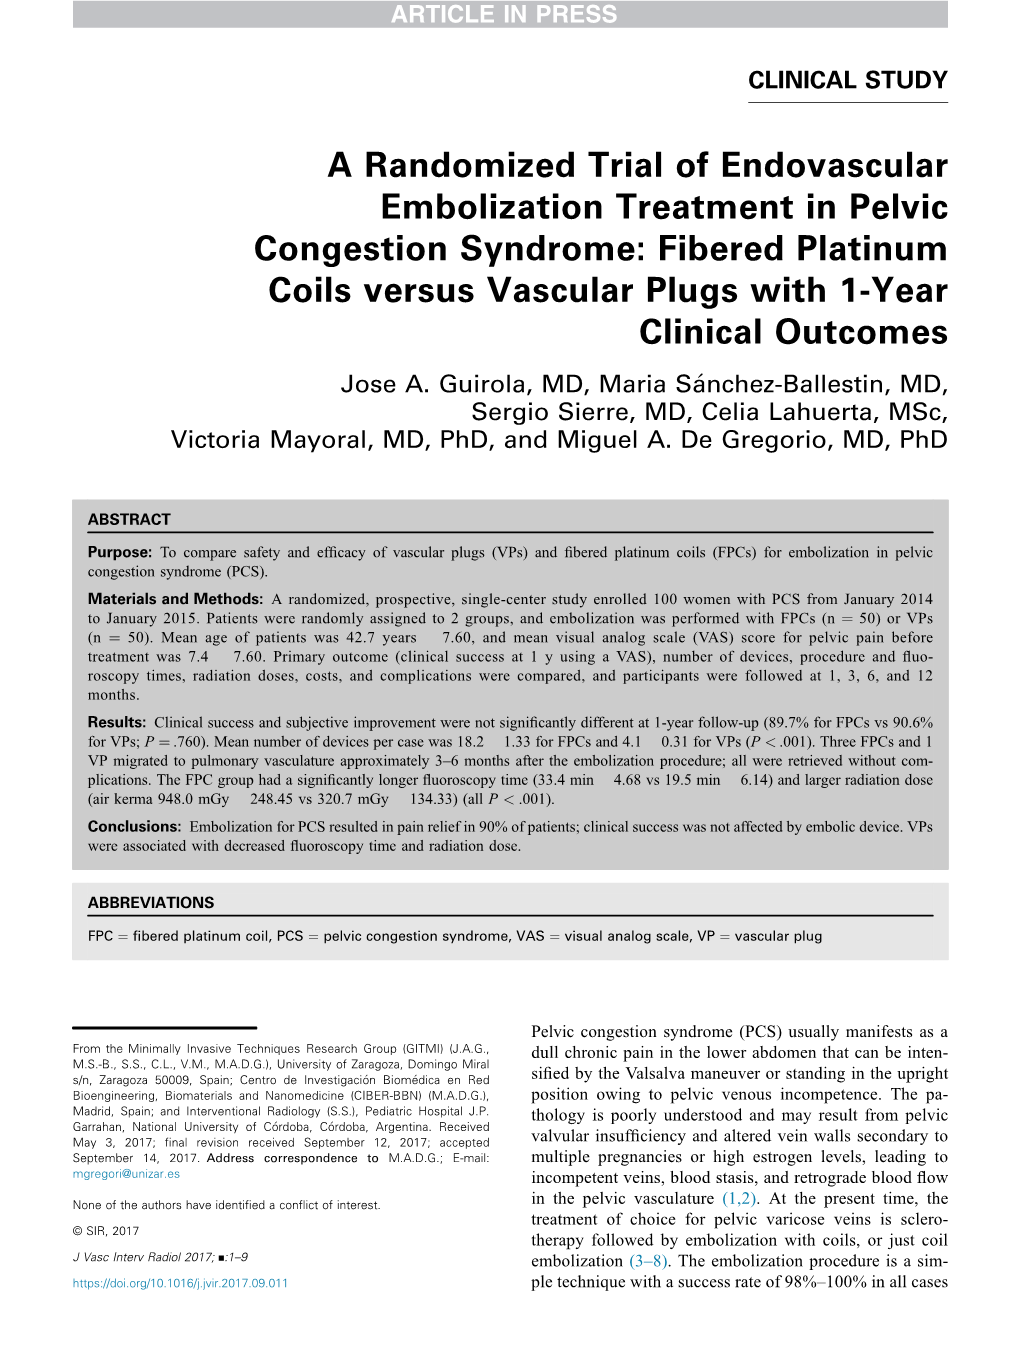 A Randomized Trial of Endovascular Embolization Treatment in Pelvic